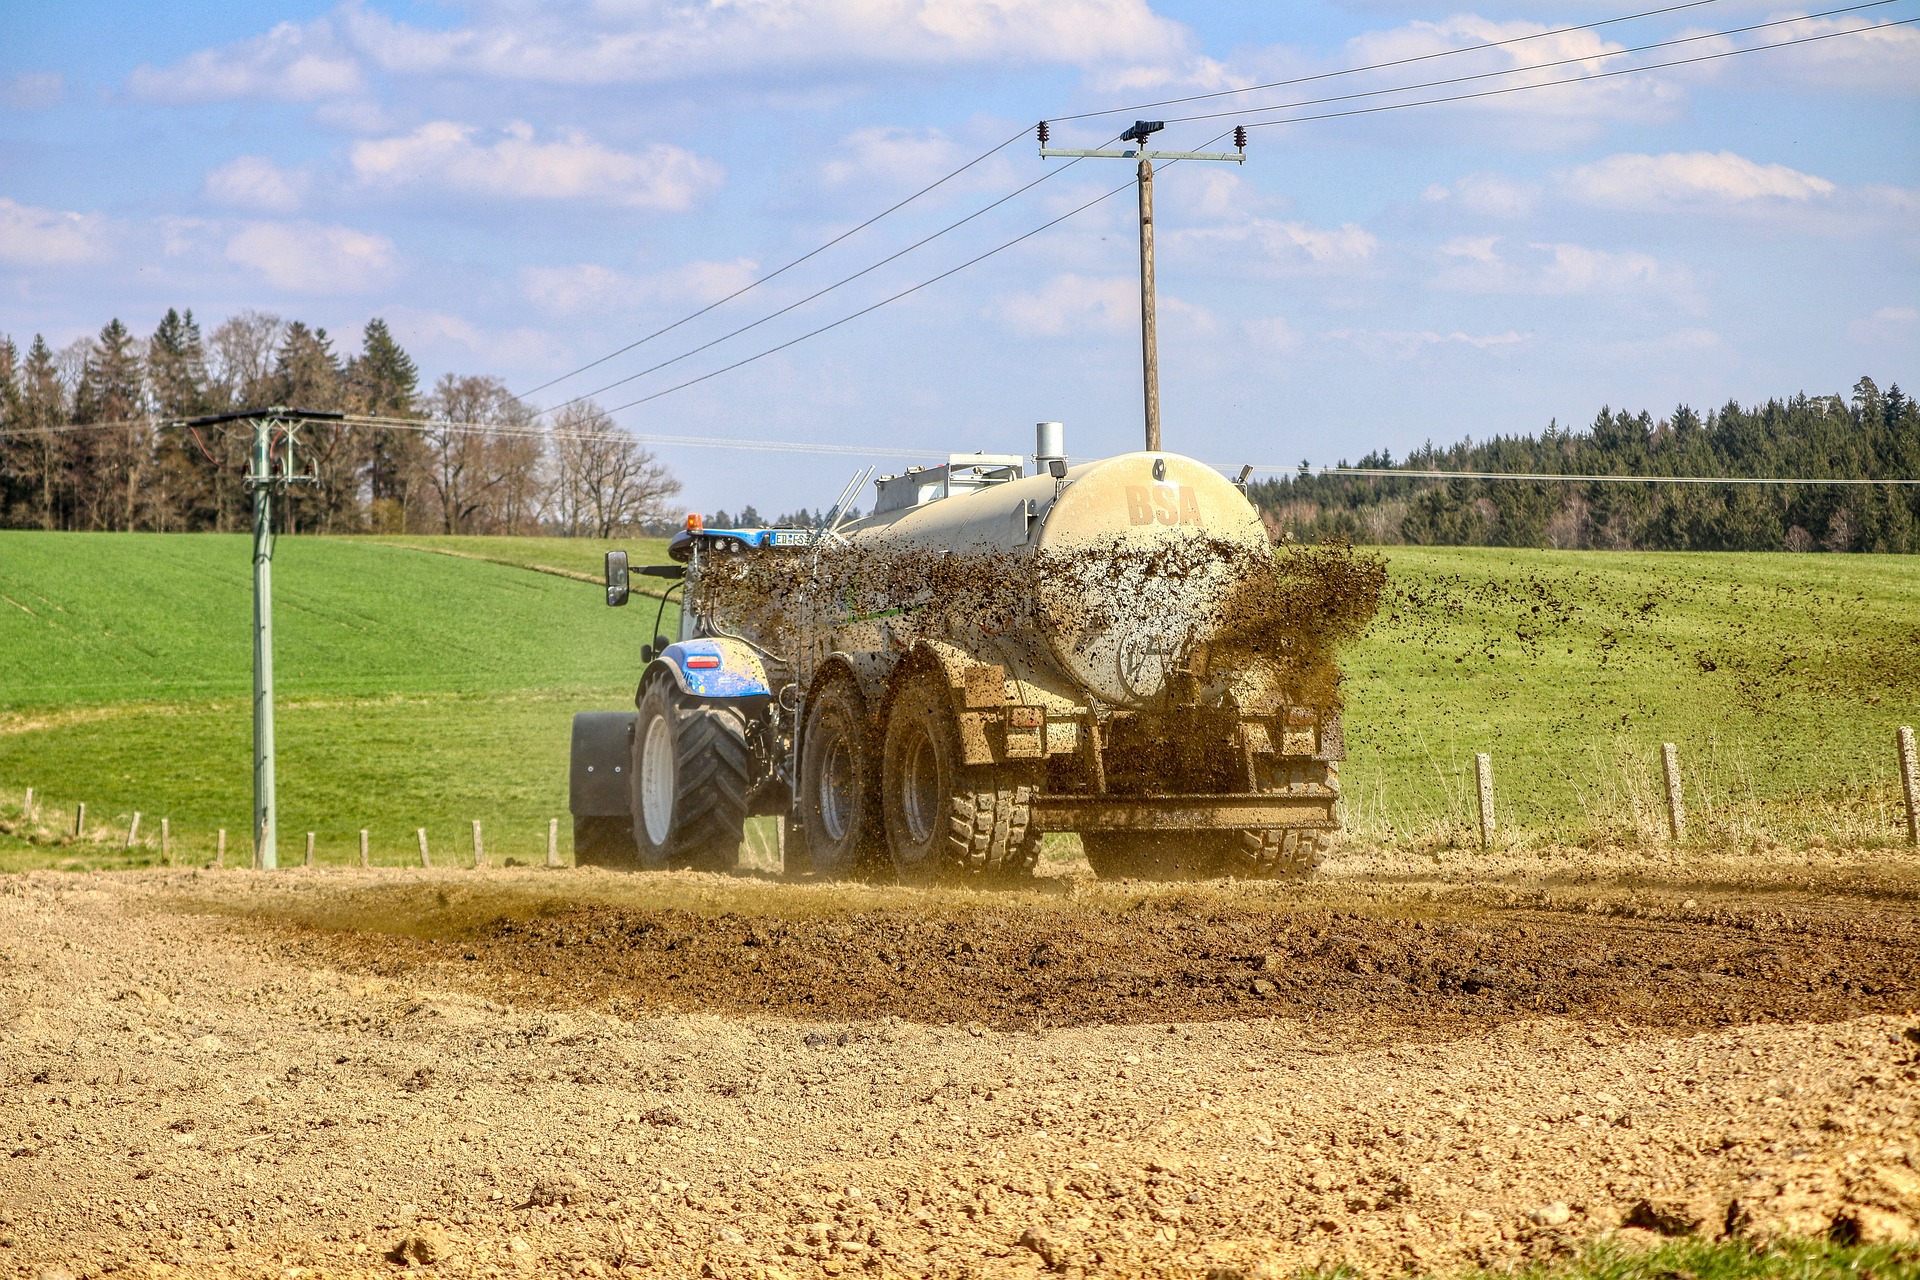 tractor-5003754_1920